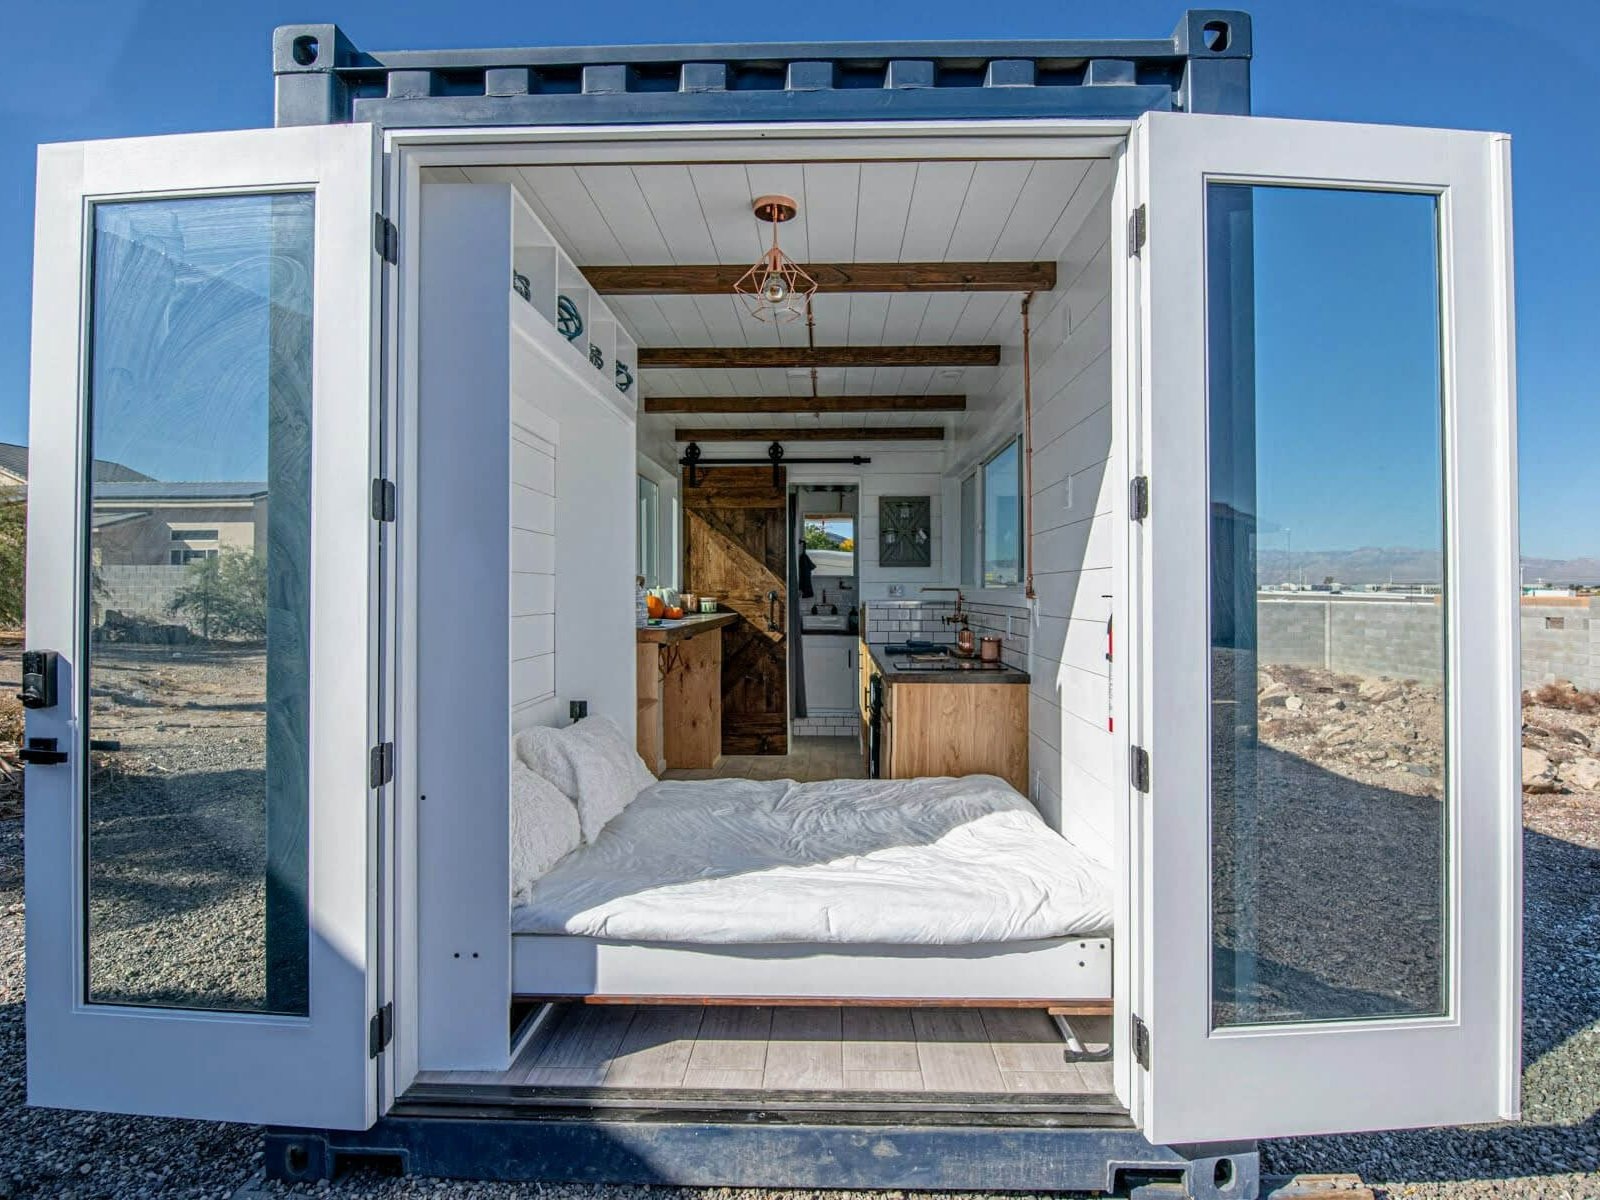 Far Out Tiny Homes